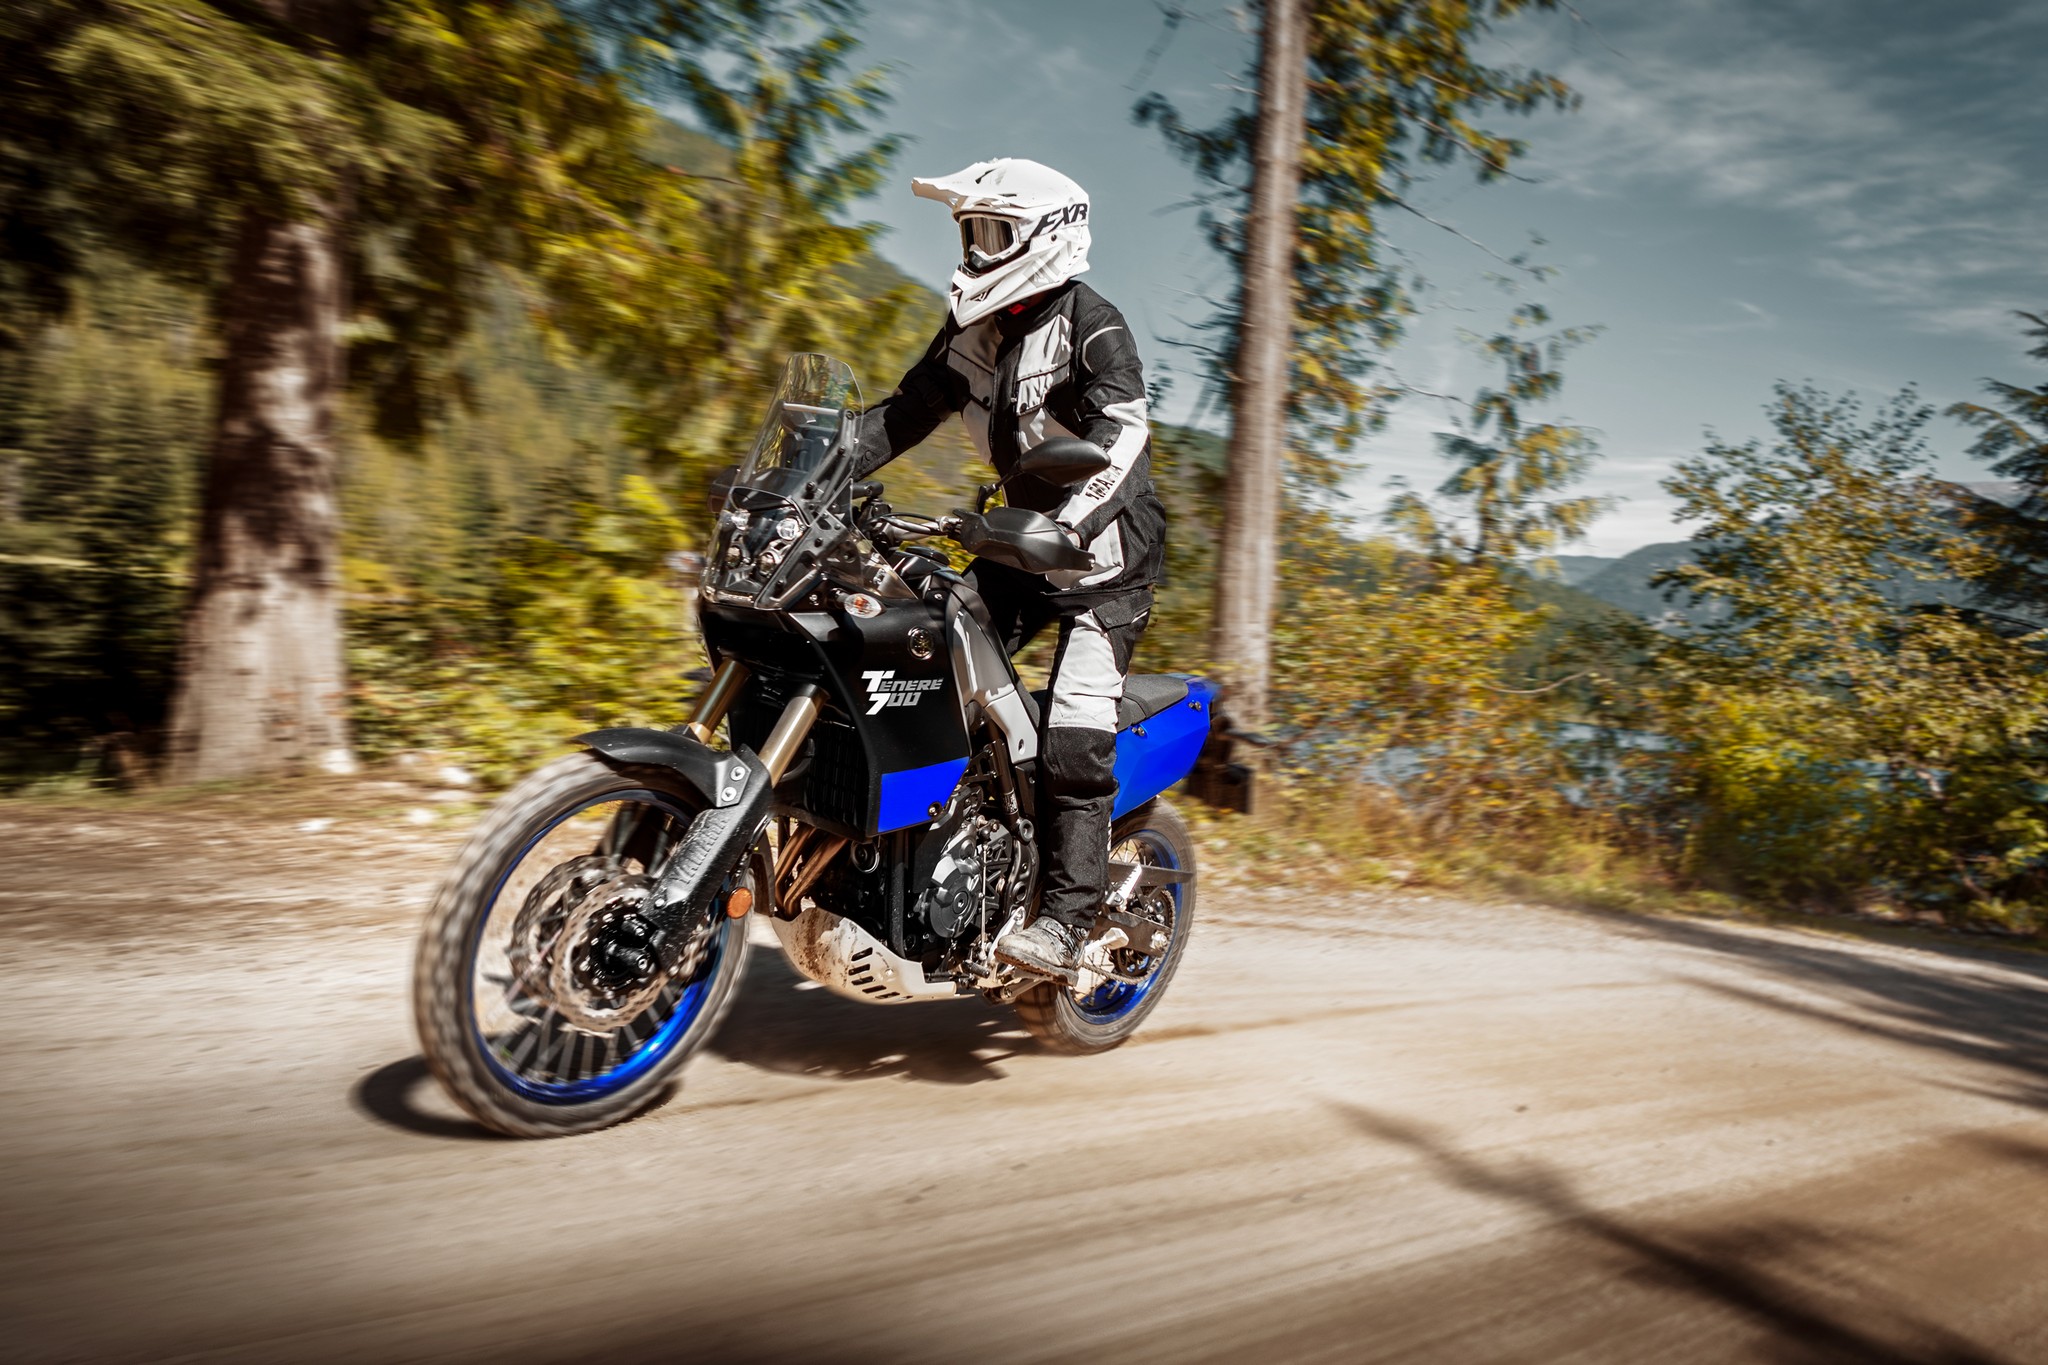 A view of a rider enjoying the new 2021 Yamaha Tenere 700